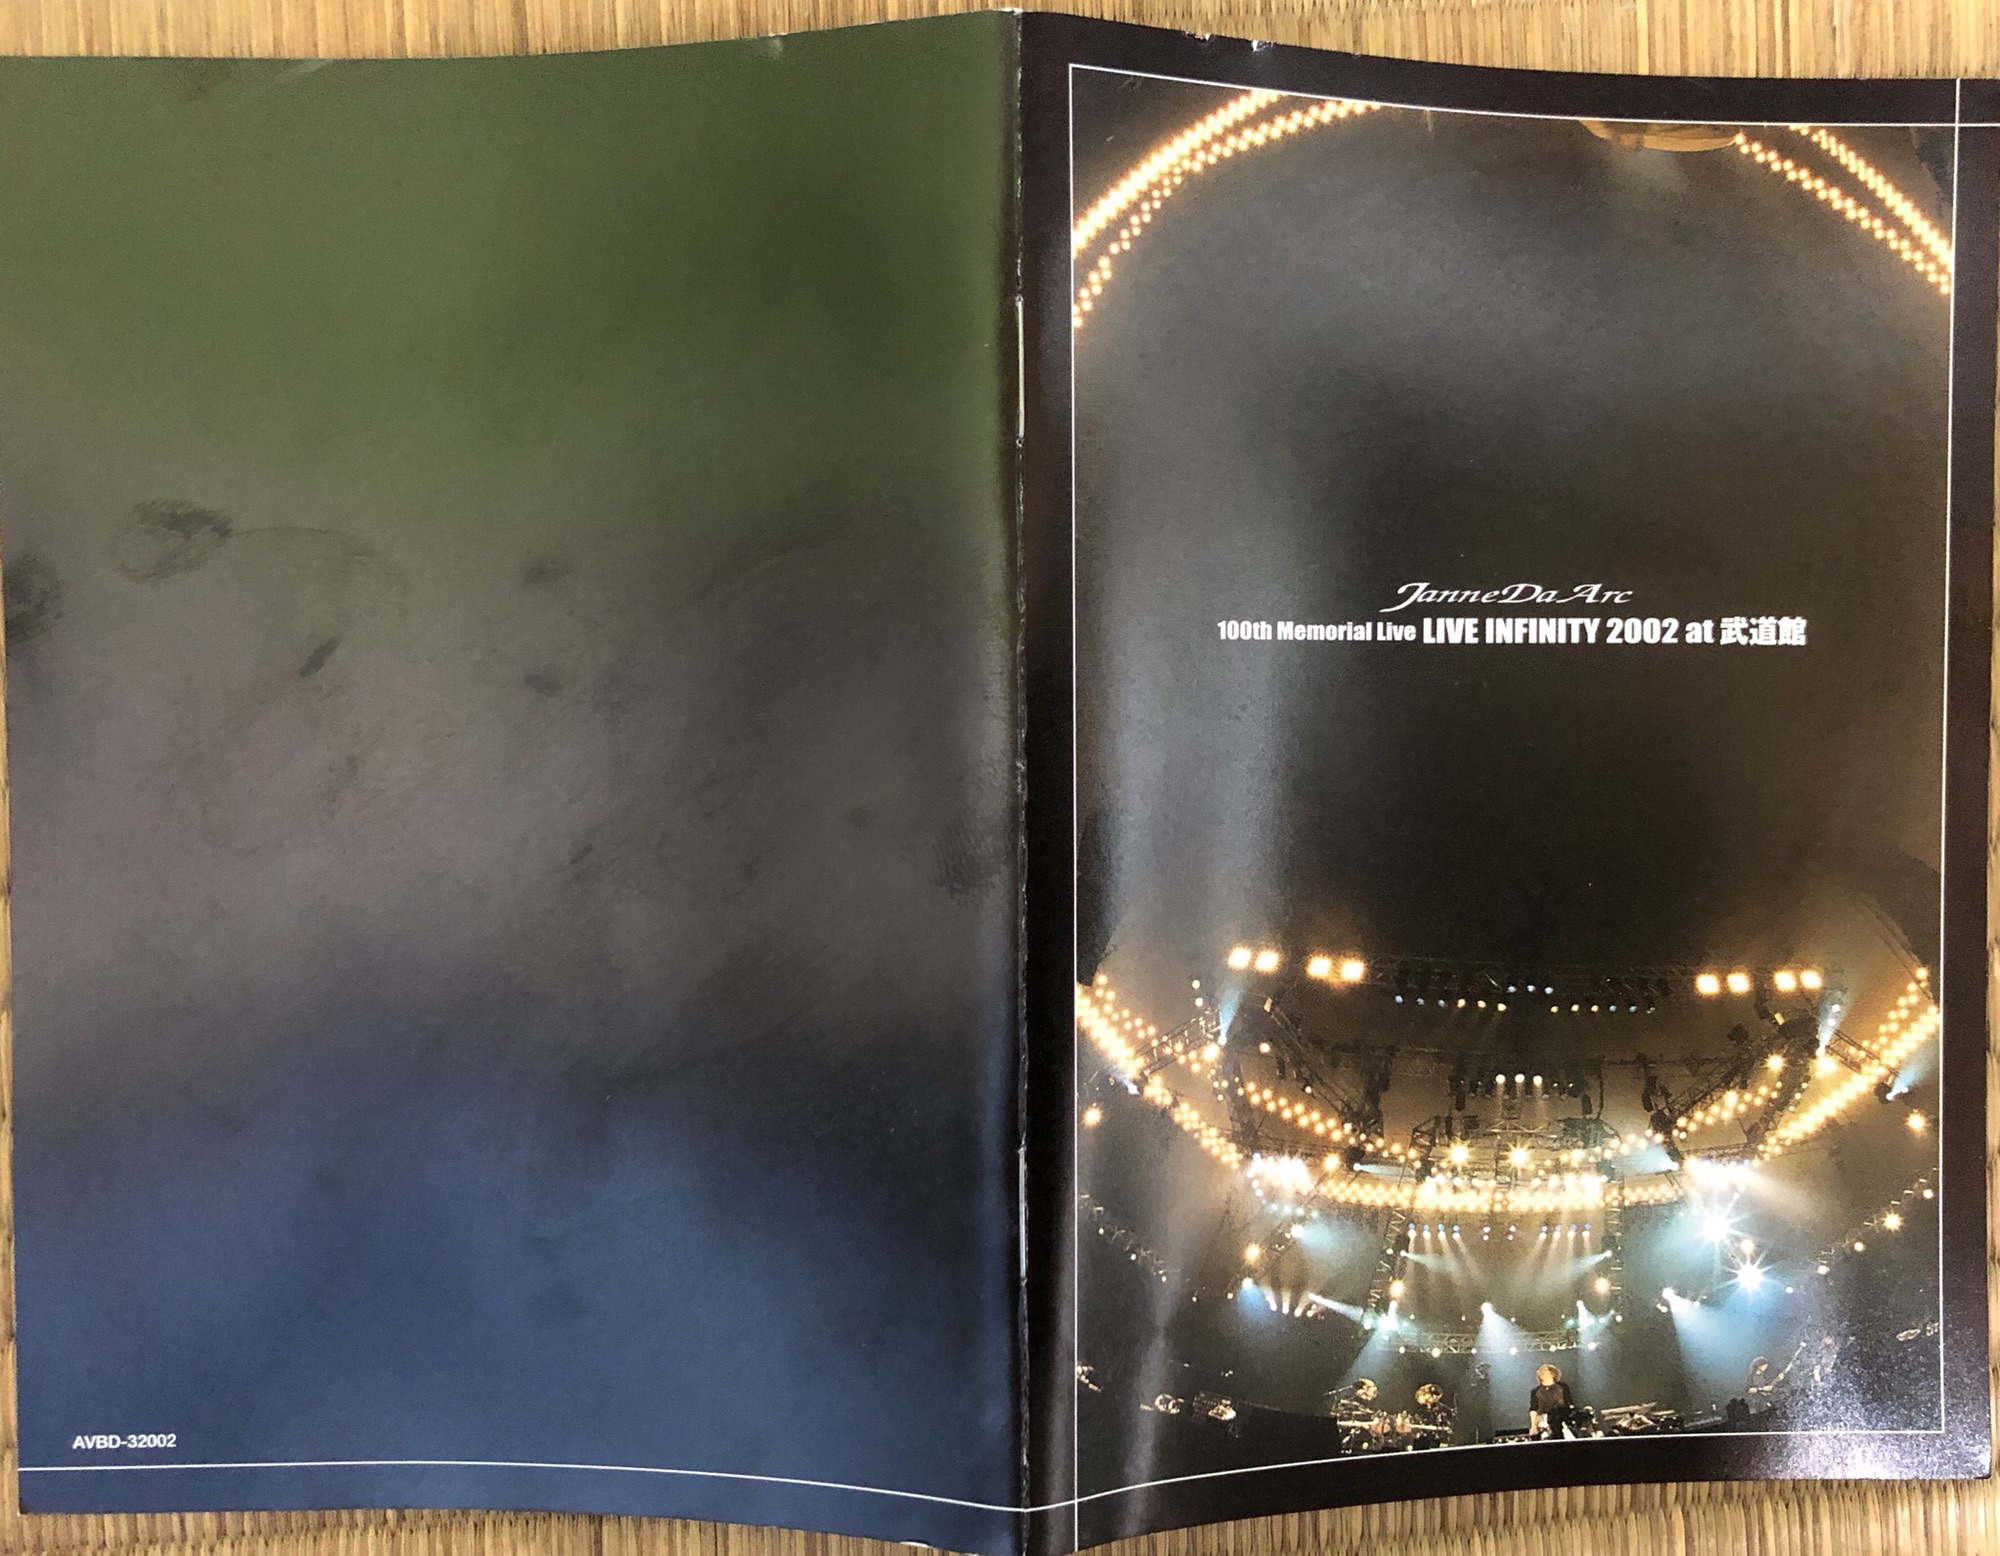 live video&DVD〝100th Memorial Live 〜Live Infinity 2002 at 武道館 ...